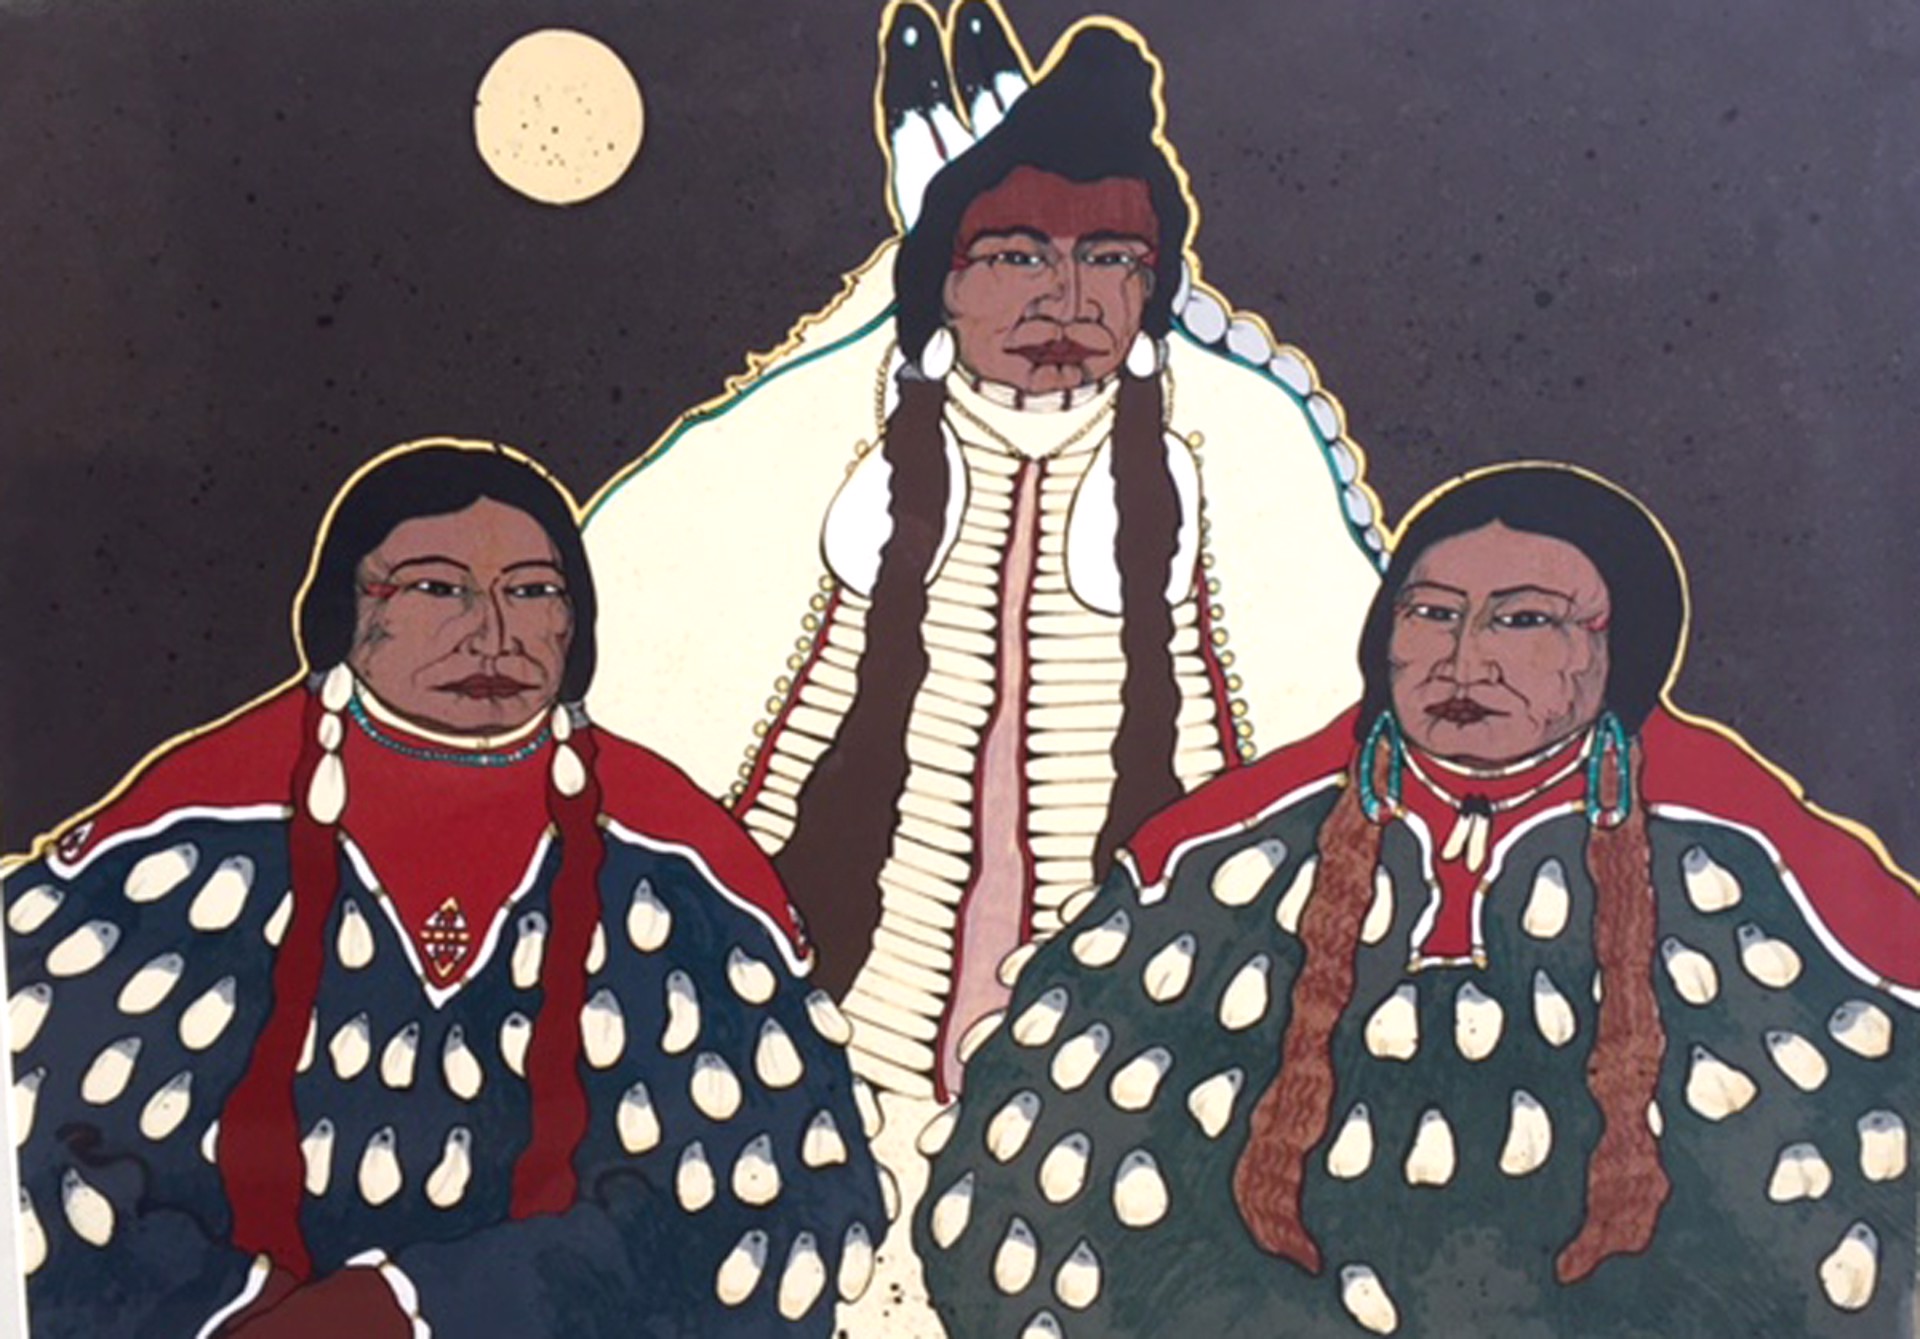 Chief with Two Women by Kevin Red Star